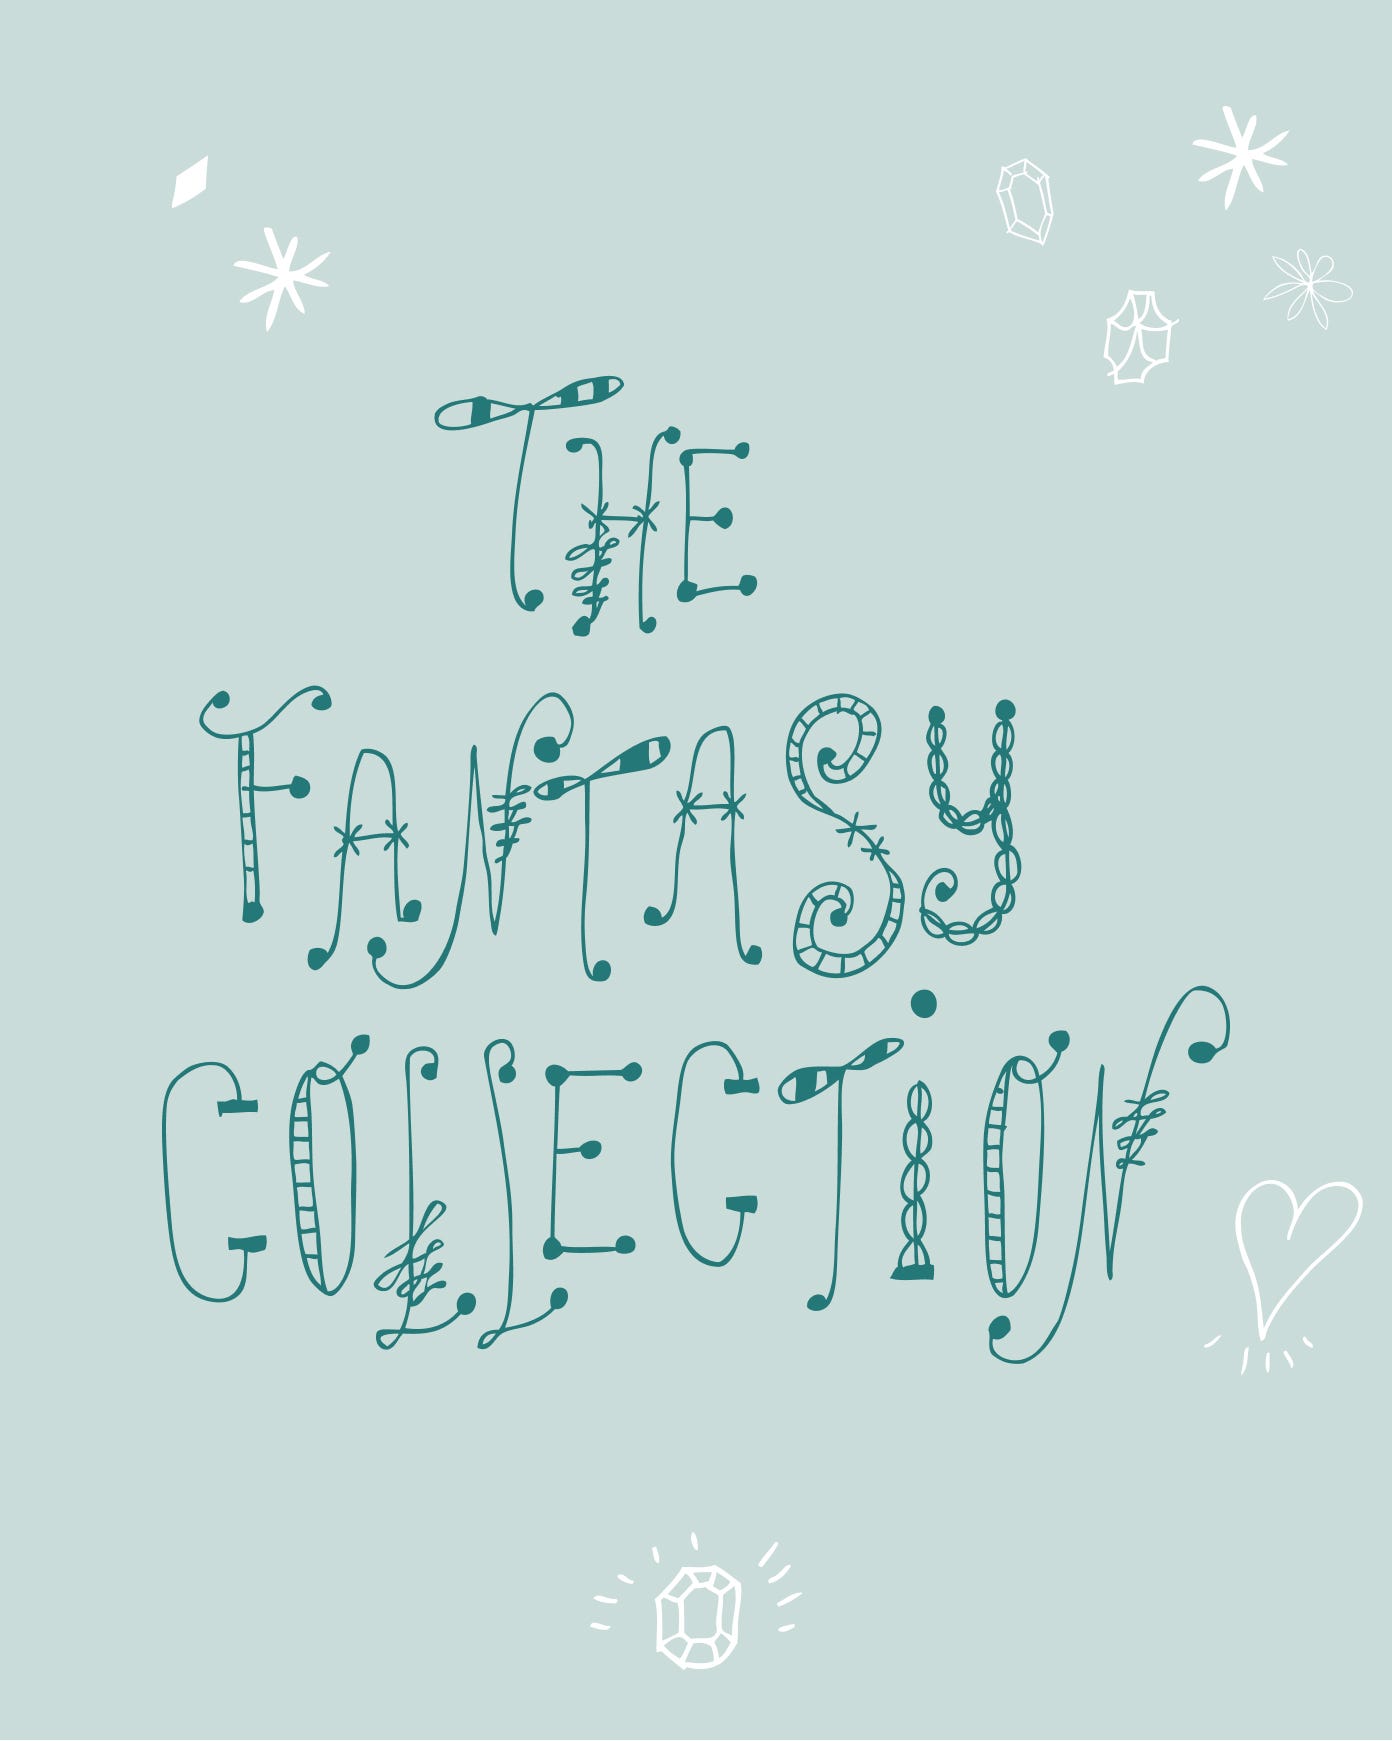 The Fantasy Collection